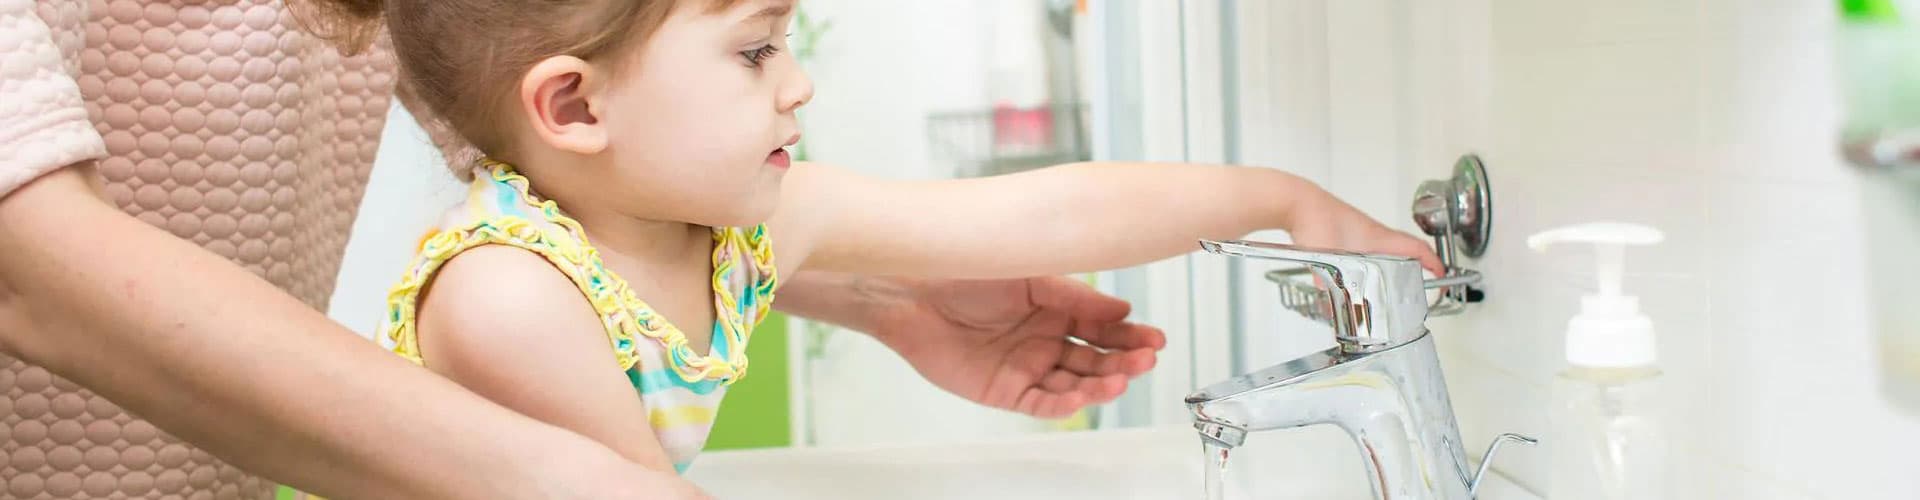 Little girl pouring water from the faucet